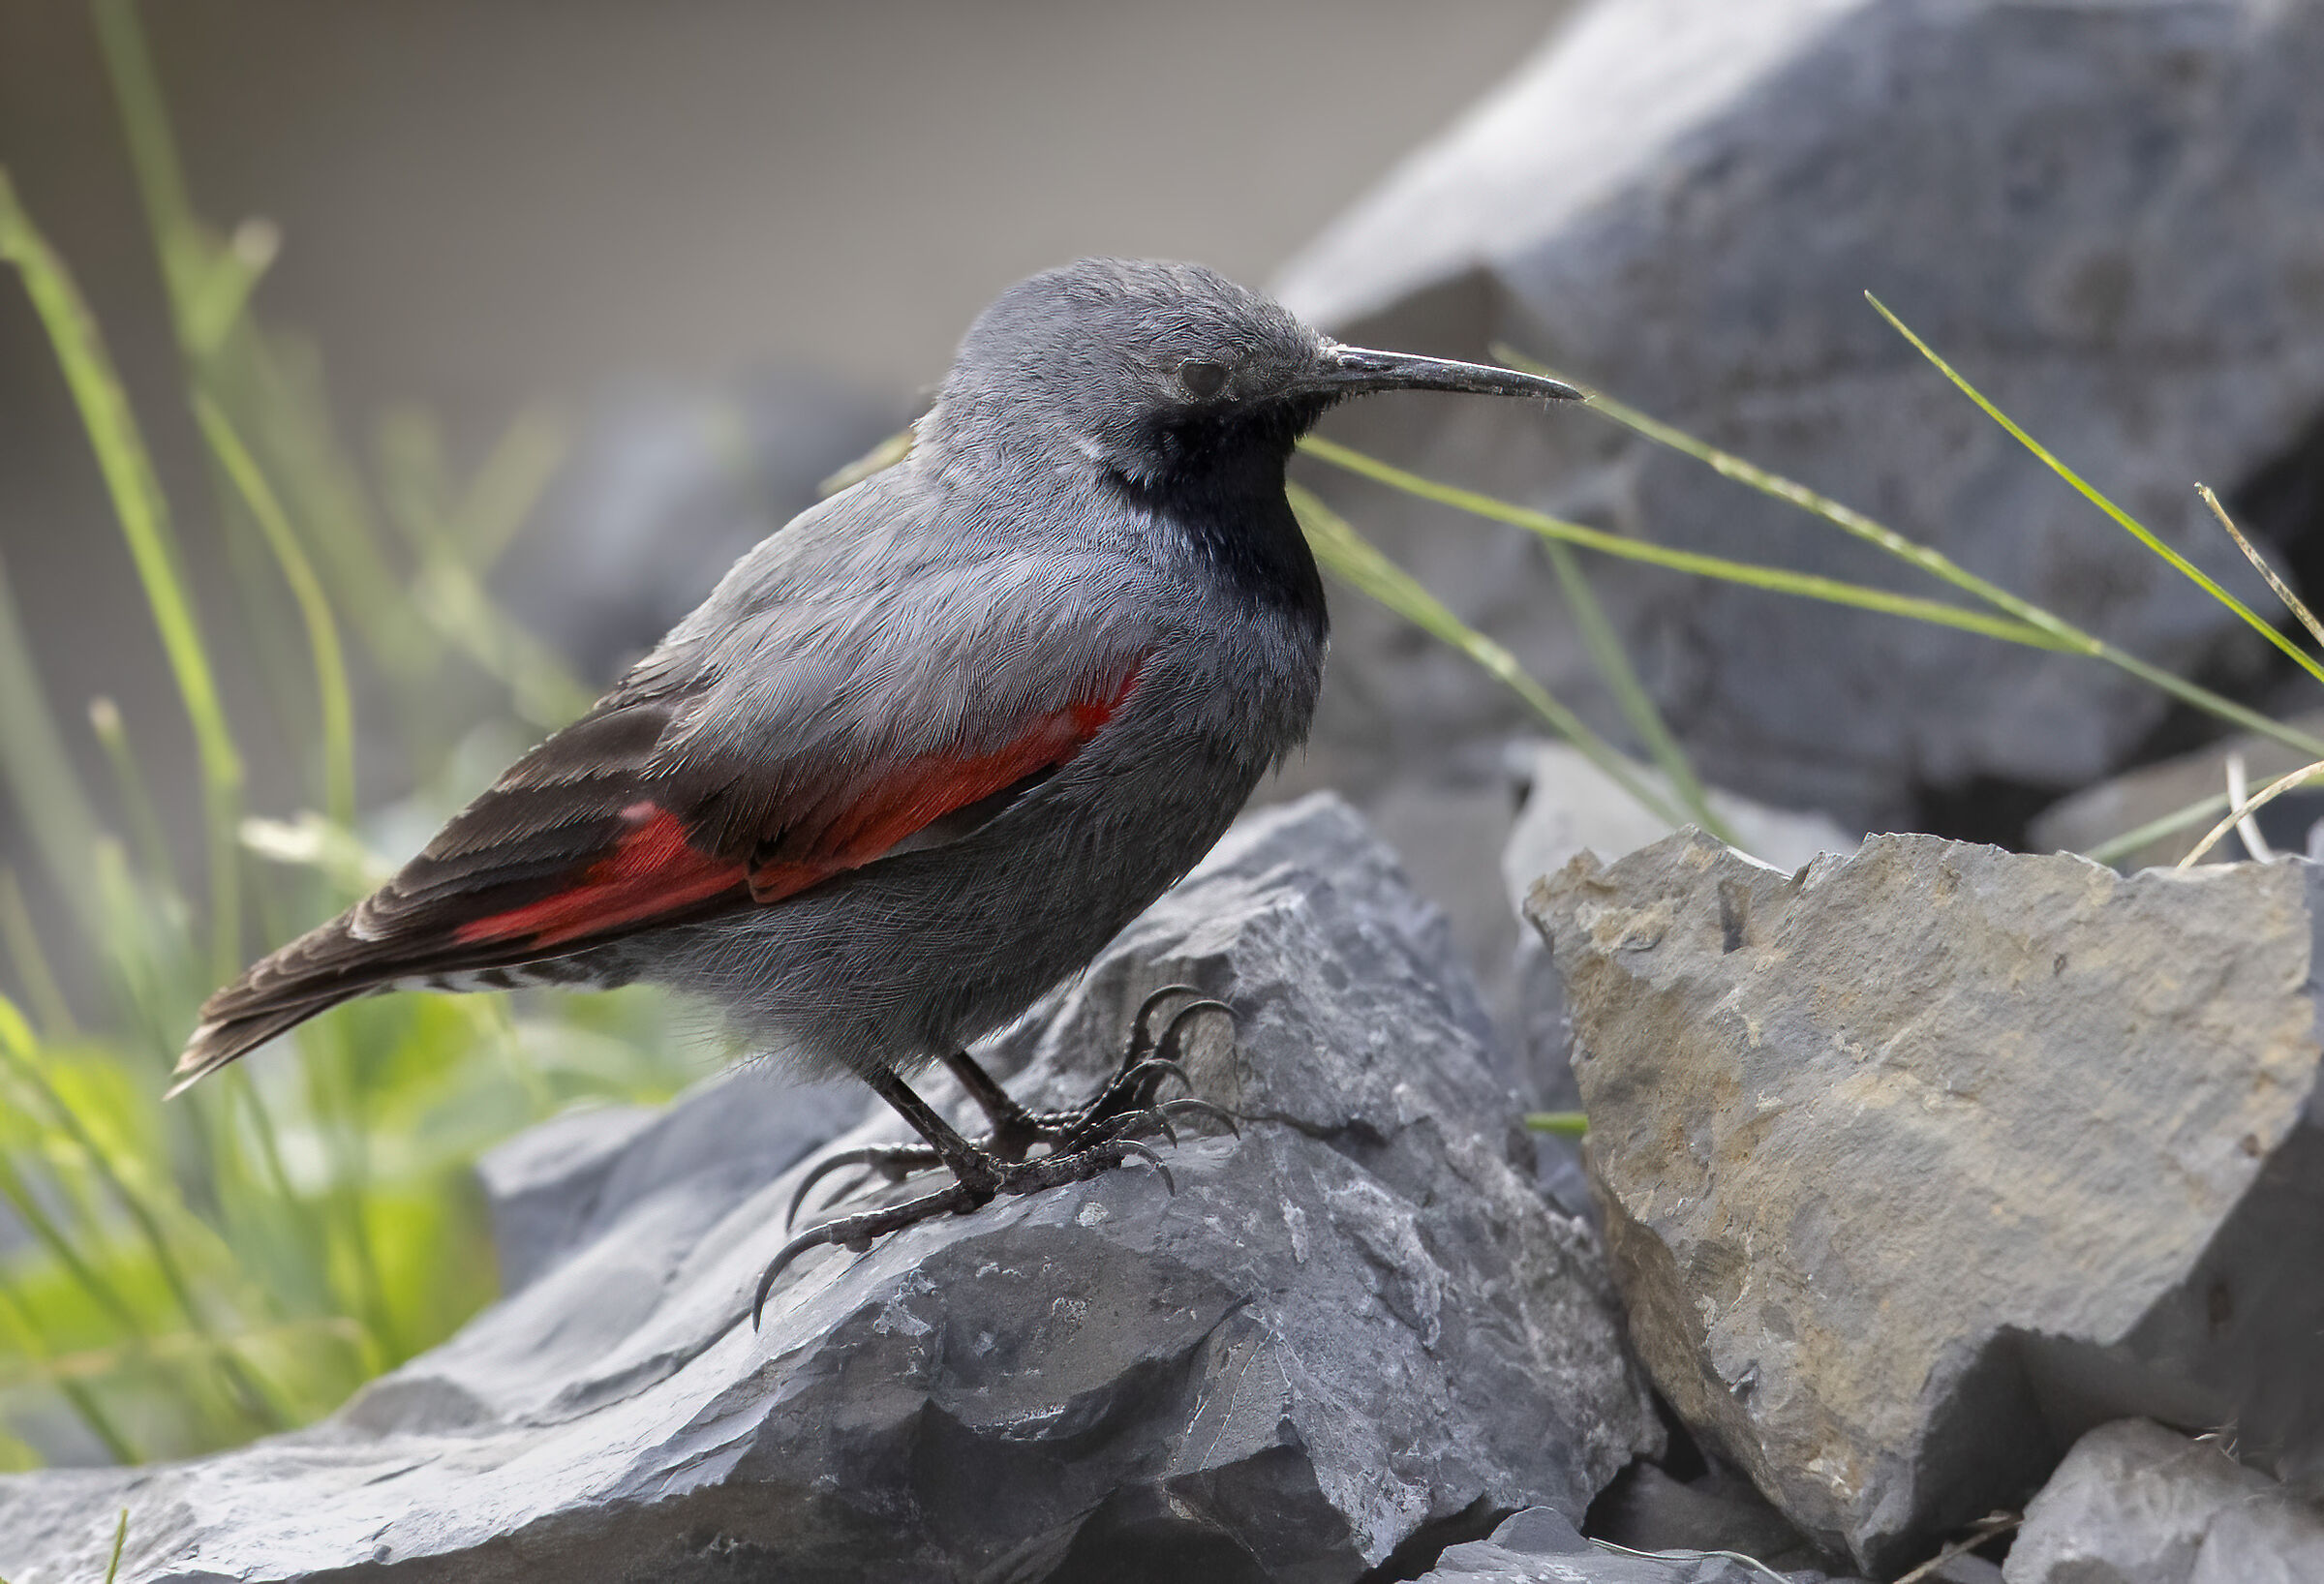 Magic of nature, wallcreeper in livery...